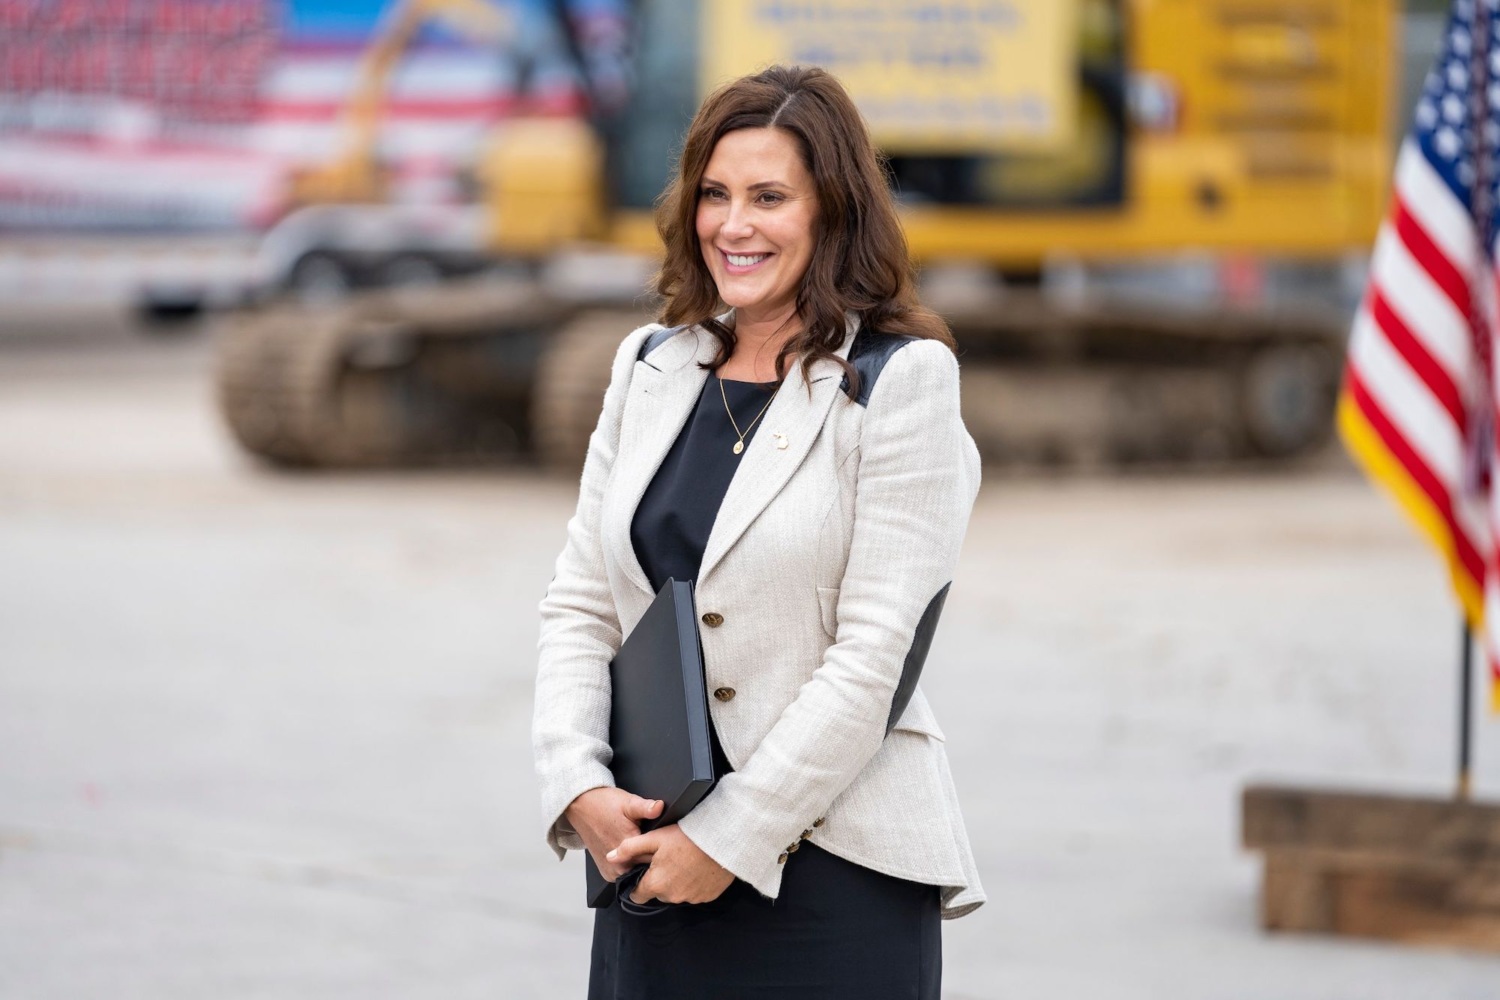 Report: Michigan Sees 11 Months of Straight Job Growth Under Whitmer Administration